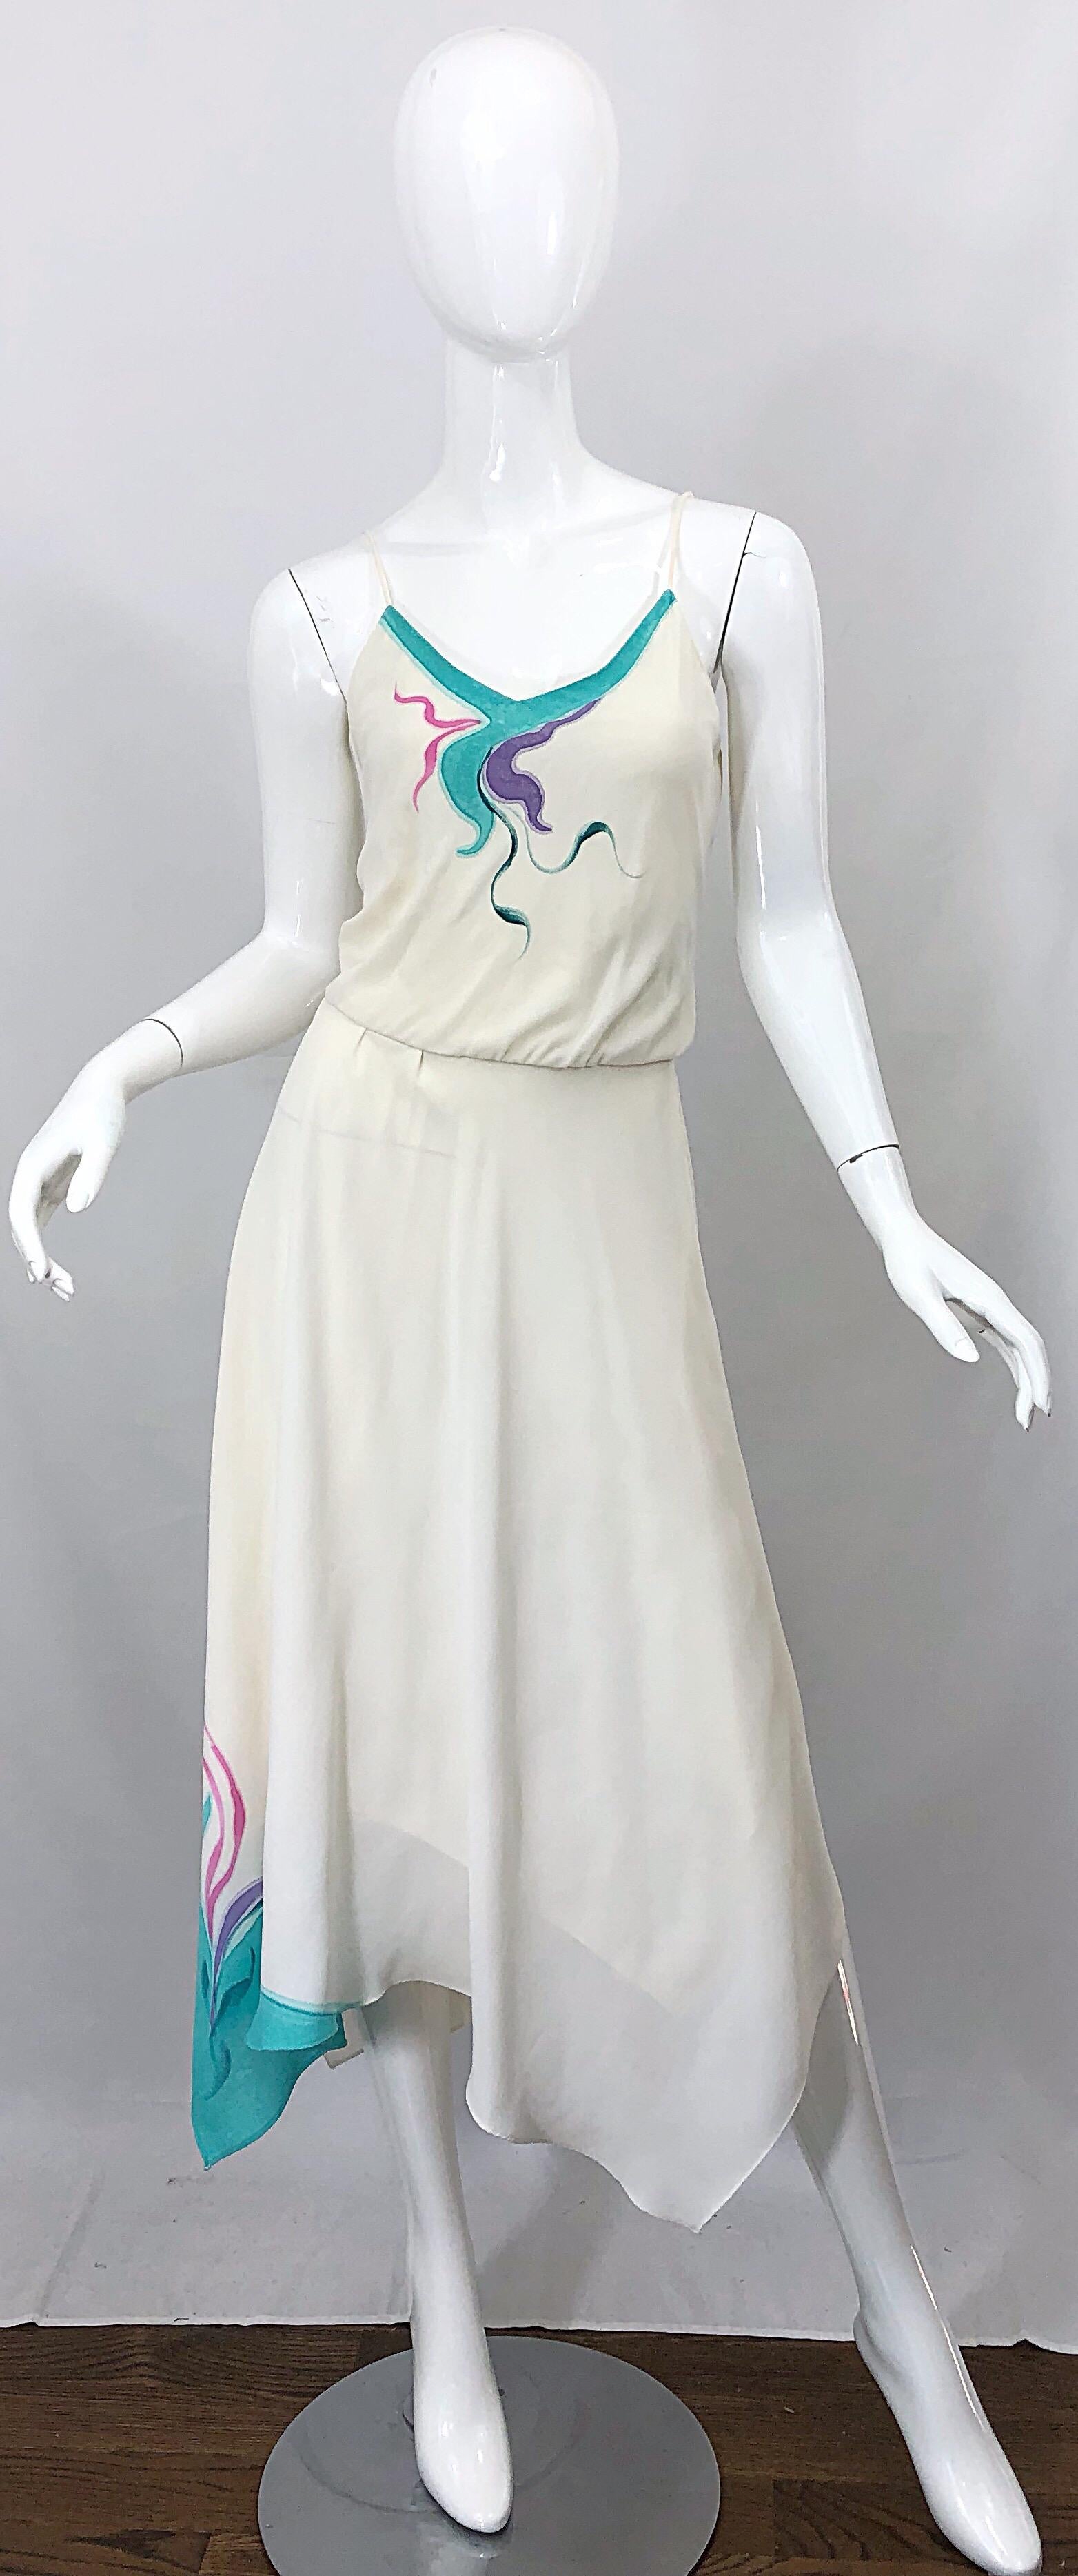 Amazing late 1970s handkerchief hem ivory, turquoise blue, pink and purple swirl print dress! Features a swirl screenprint on the bodice and on the right side of the hem of the skirt. Elastic waistband can stretch to fit an array of sizes. Great for